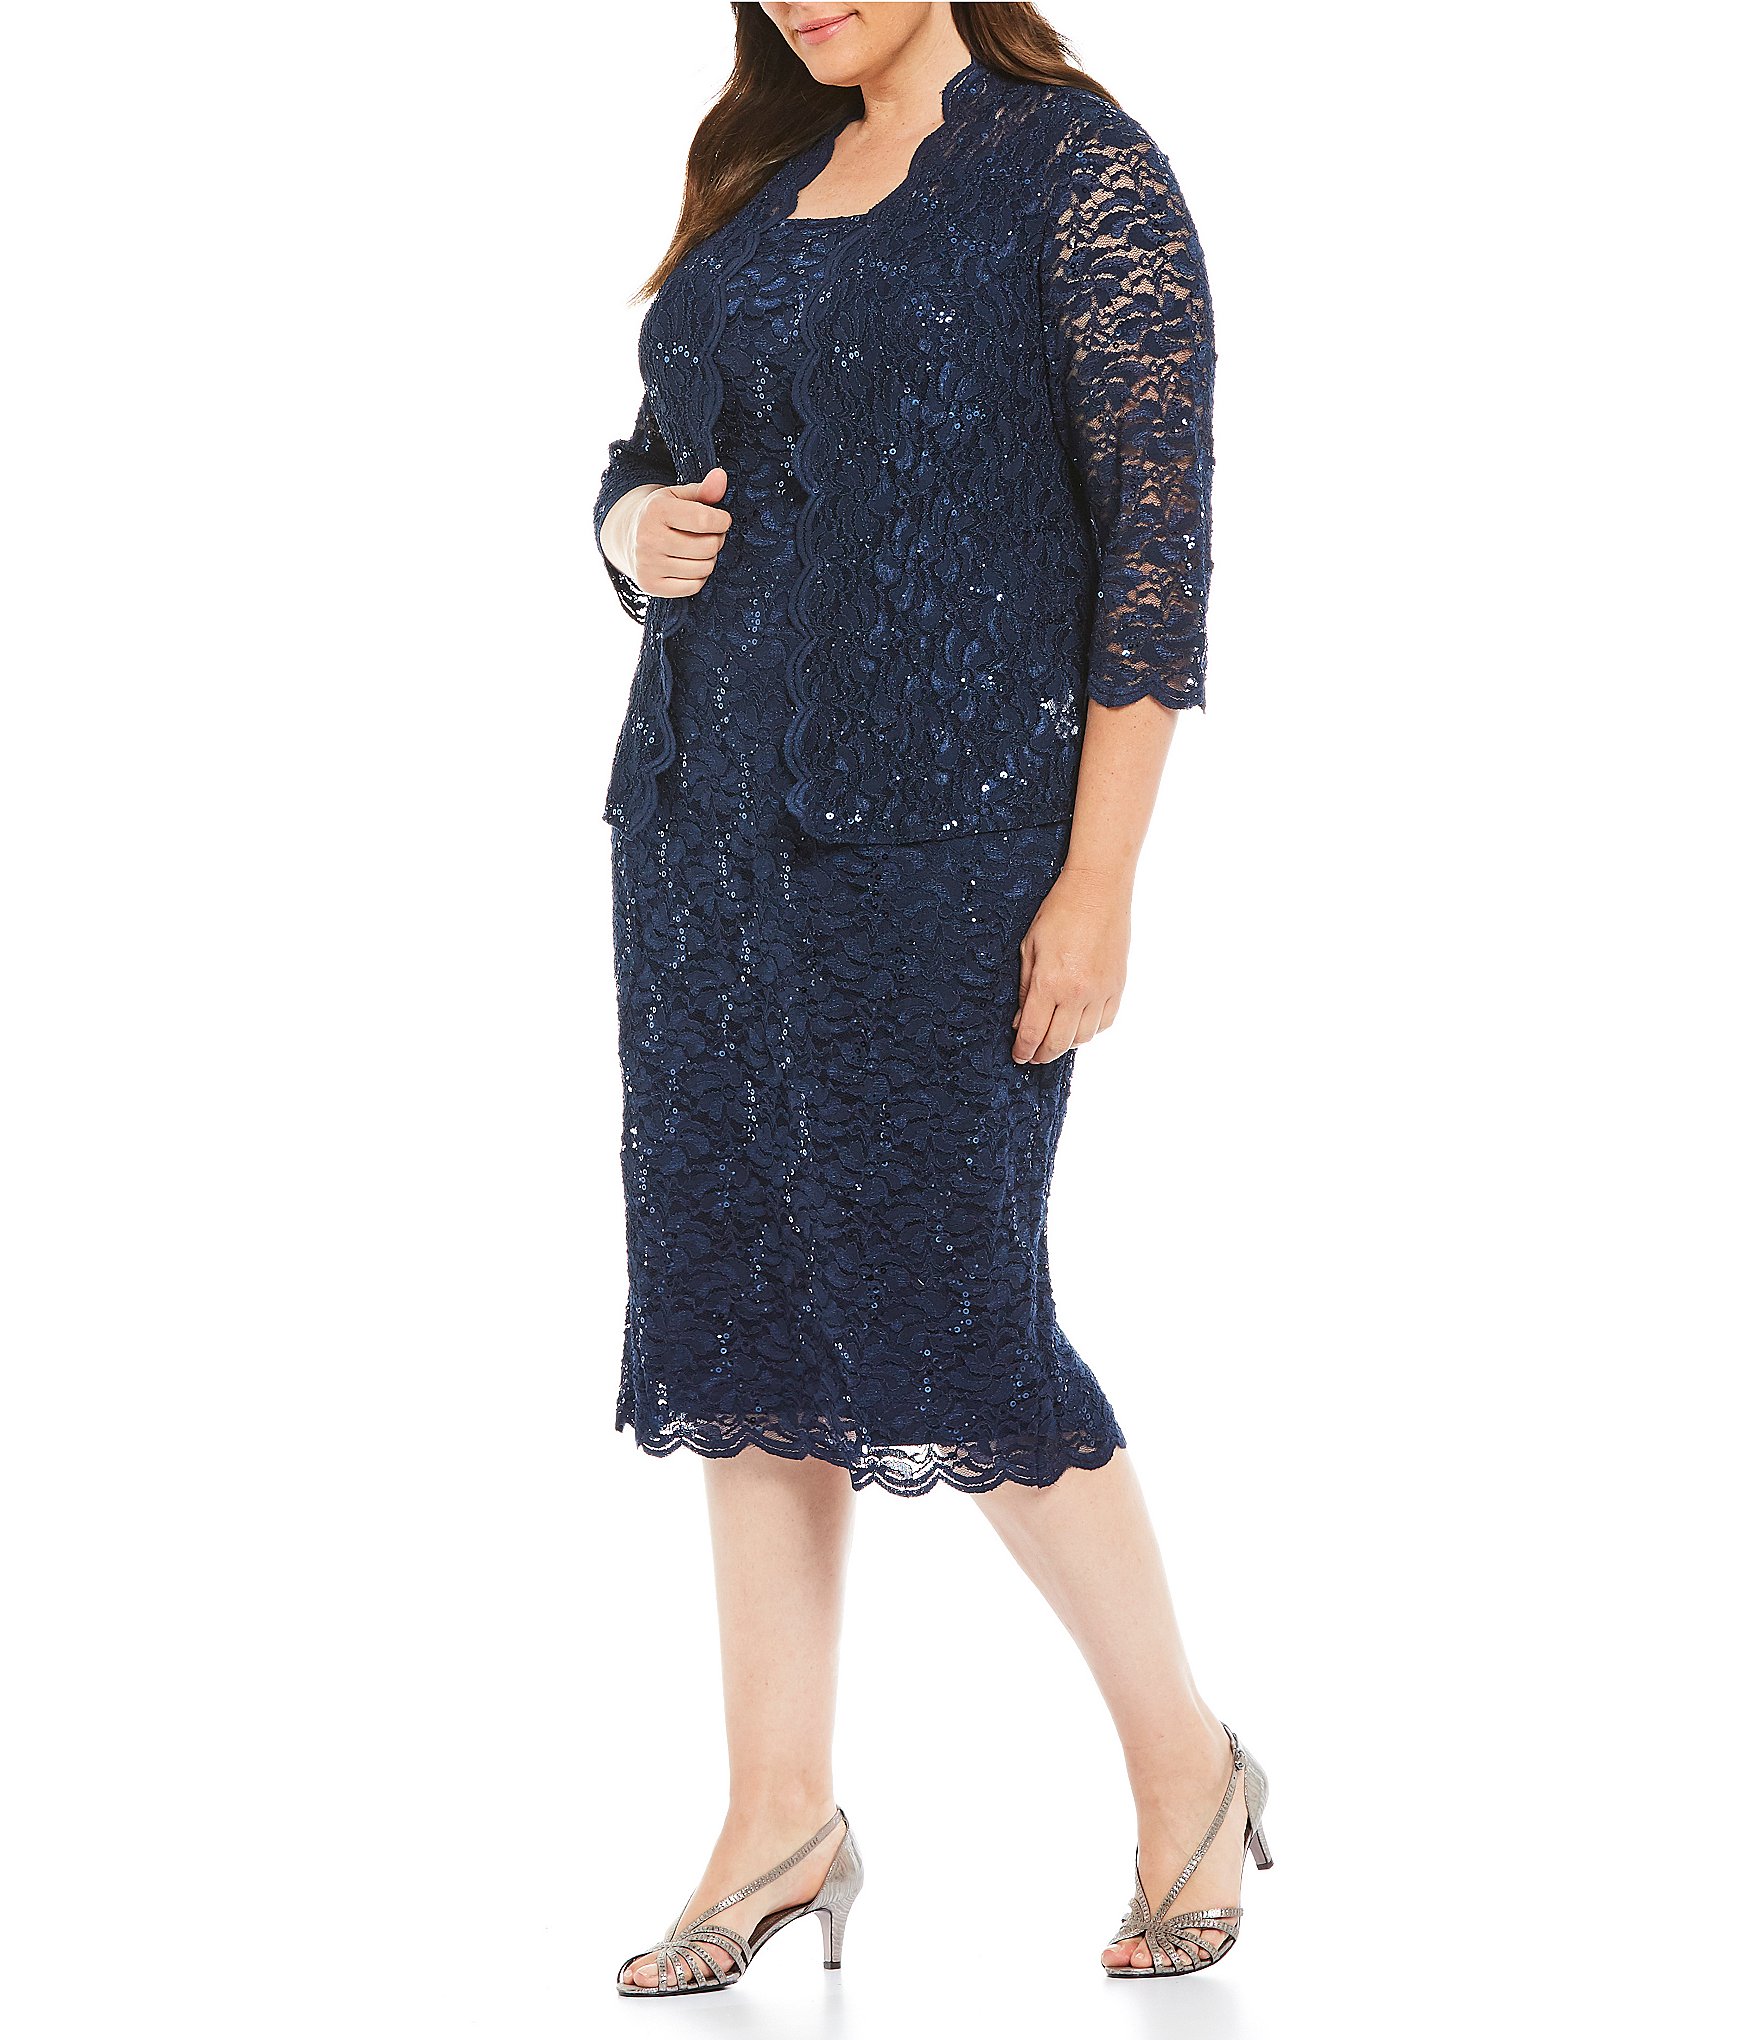 Buy > plus size navy blue dress with sleeves > in stock